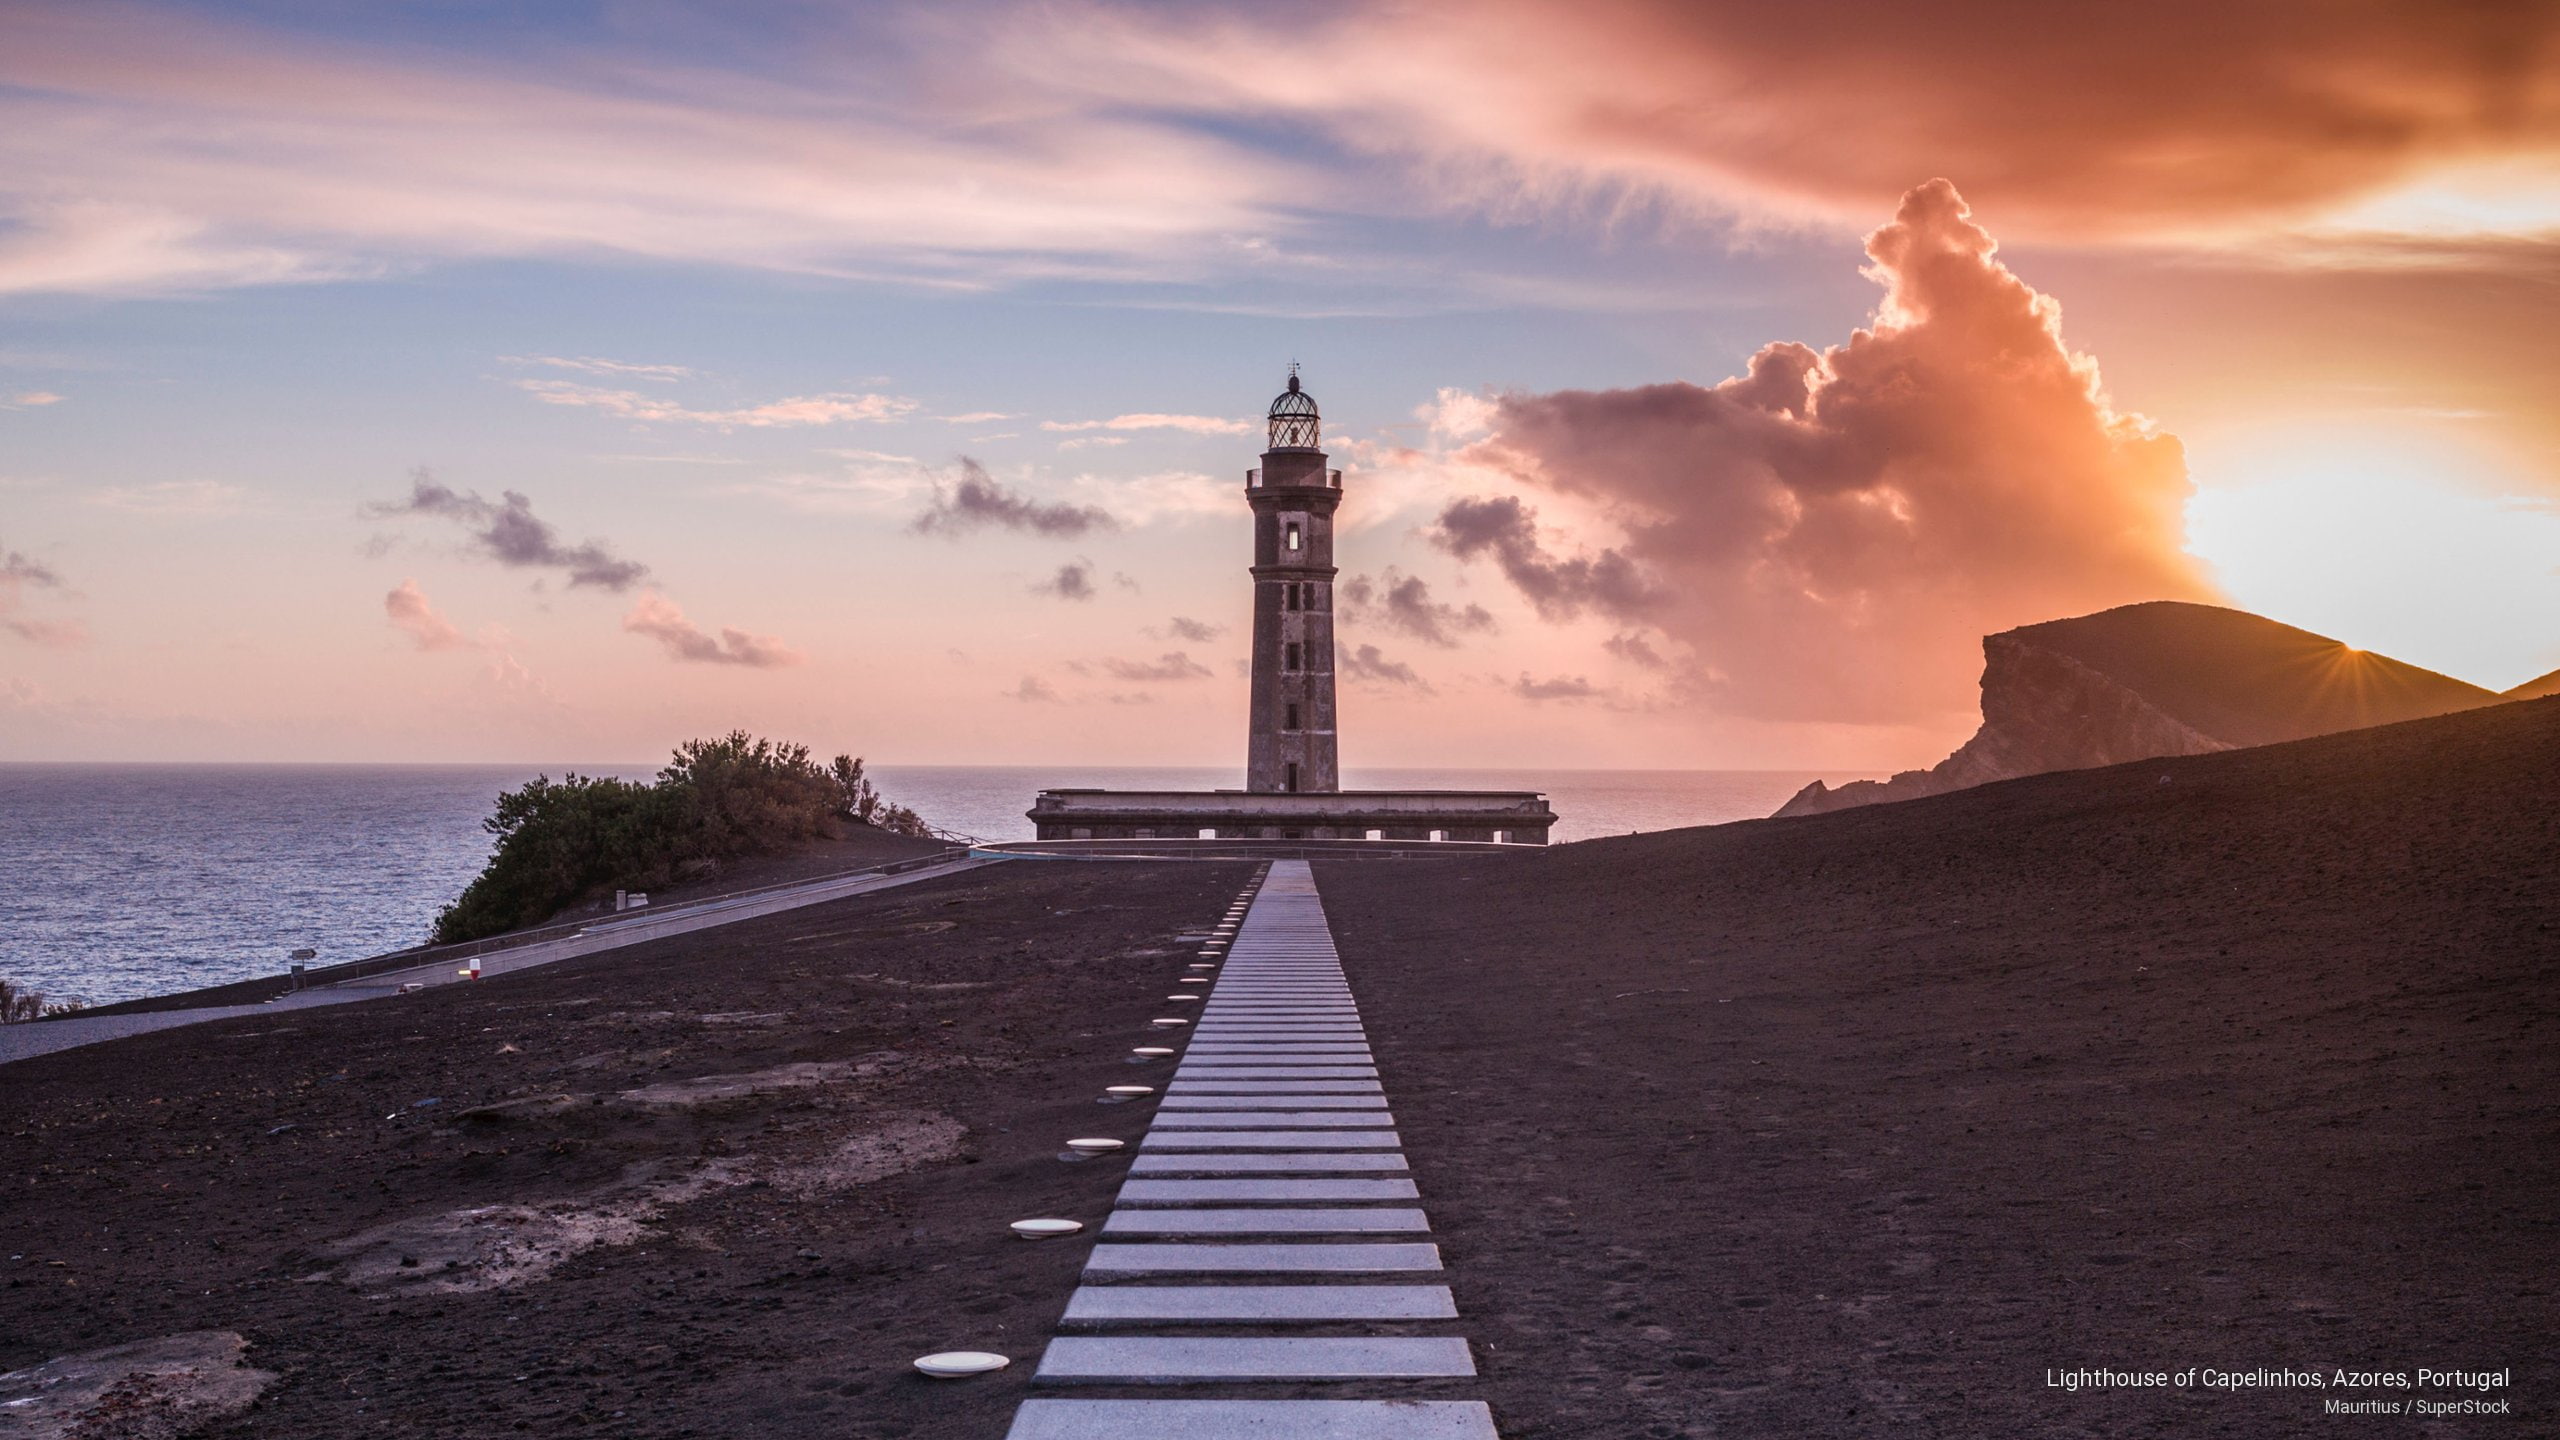 Lighthouse of Capelinhos, Azores, Portugal, Architecture